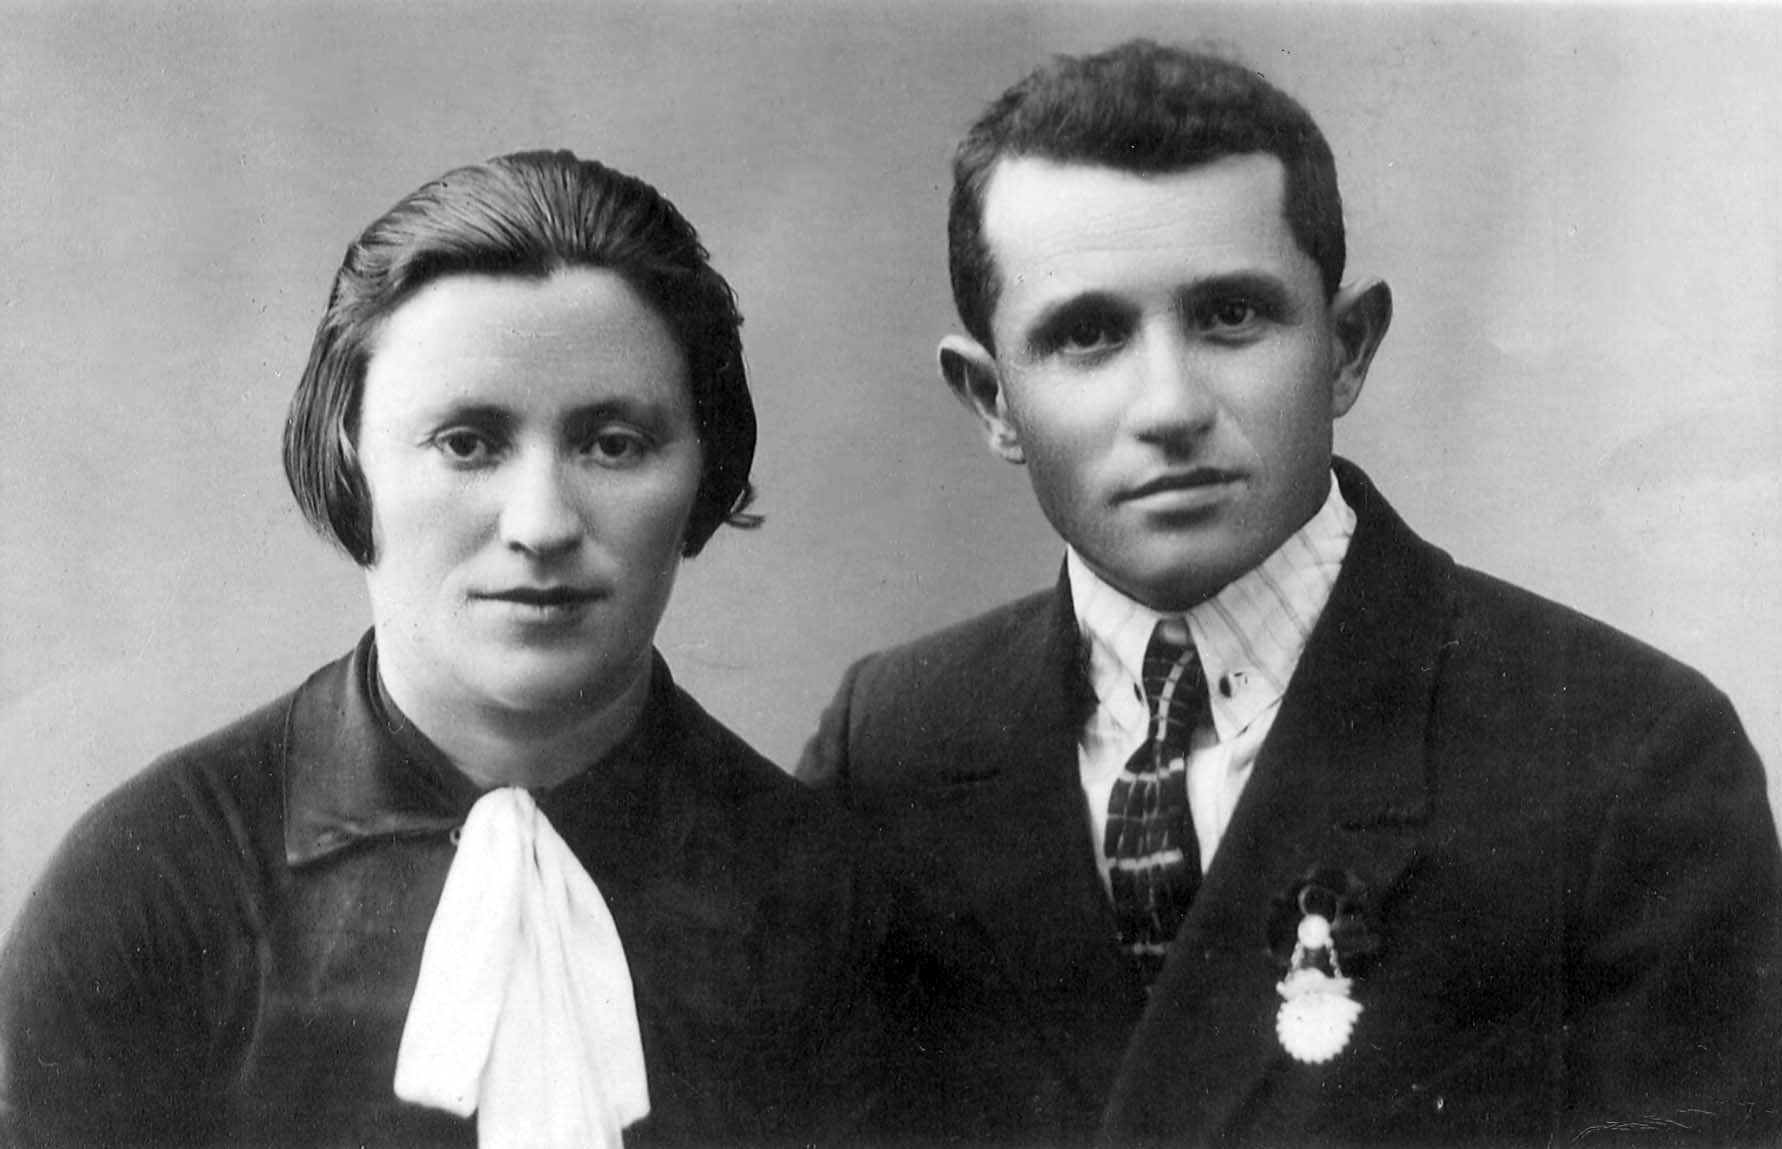 Golda Shostak lived in Kiev, Ukraine. She was murdered in September 1941 at Babi Yar. Her husband Yoyna was killed while serving in the ranks of the Red Army